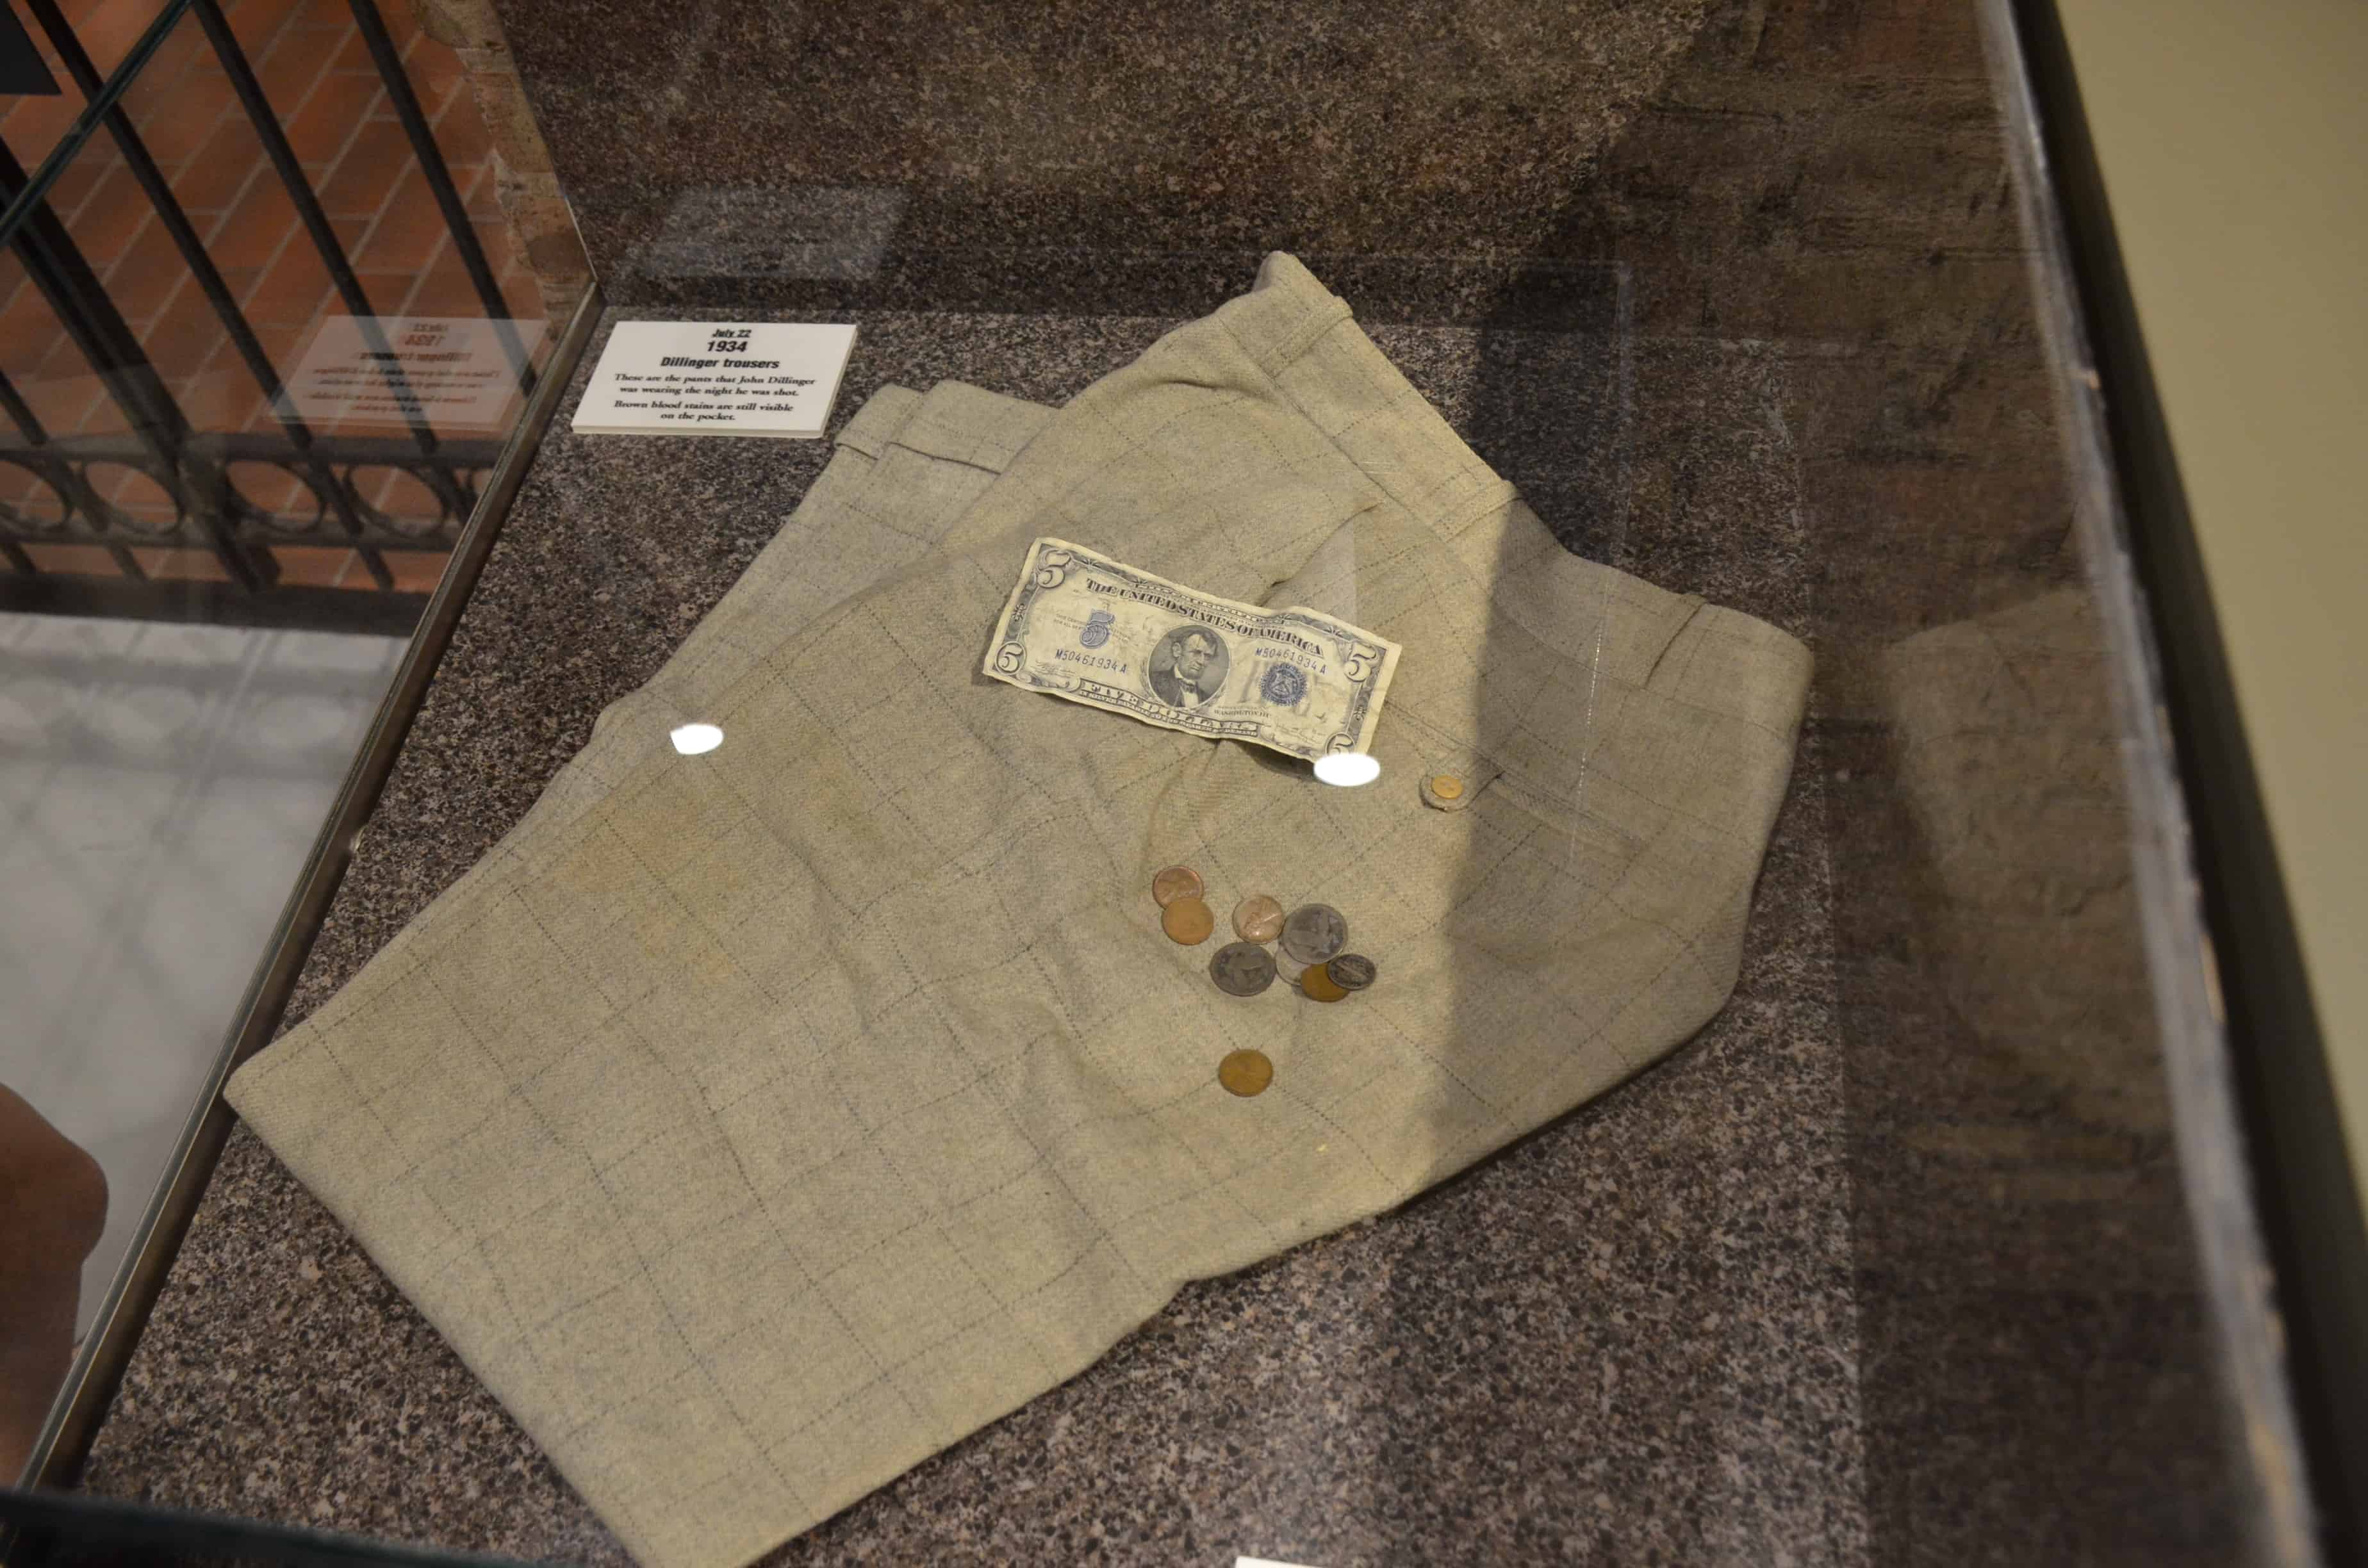 The pants Dillinger was wearing when he was killed and the change found in his pockets at the John Dillinger Museum in Crown Point, Indiana